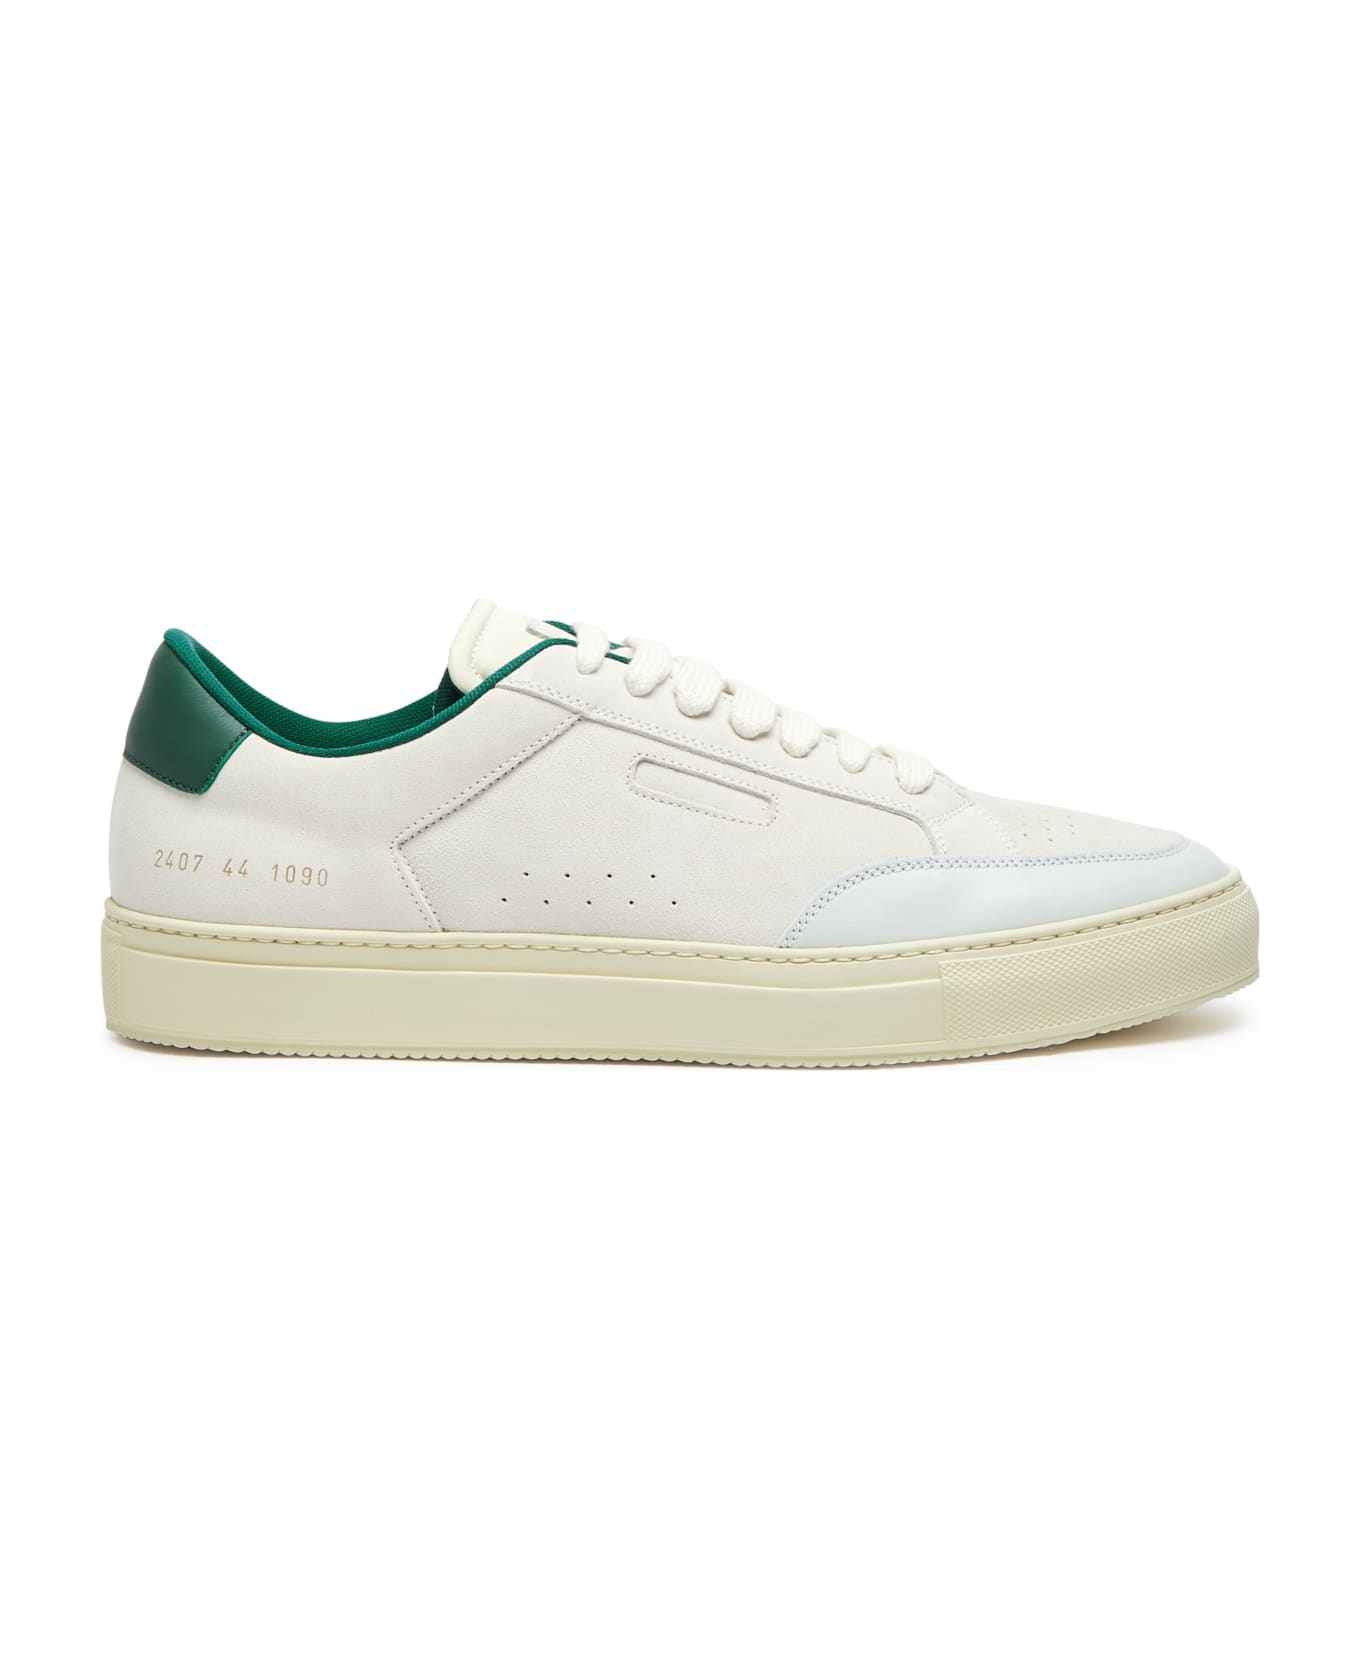 Common Projects Tennis Pro - Green スニーカー